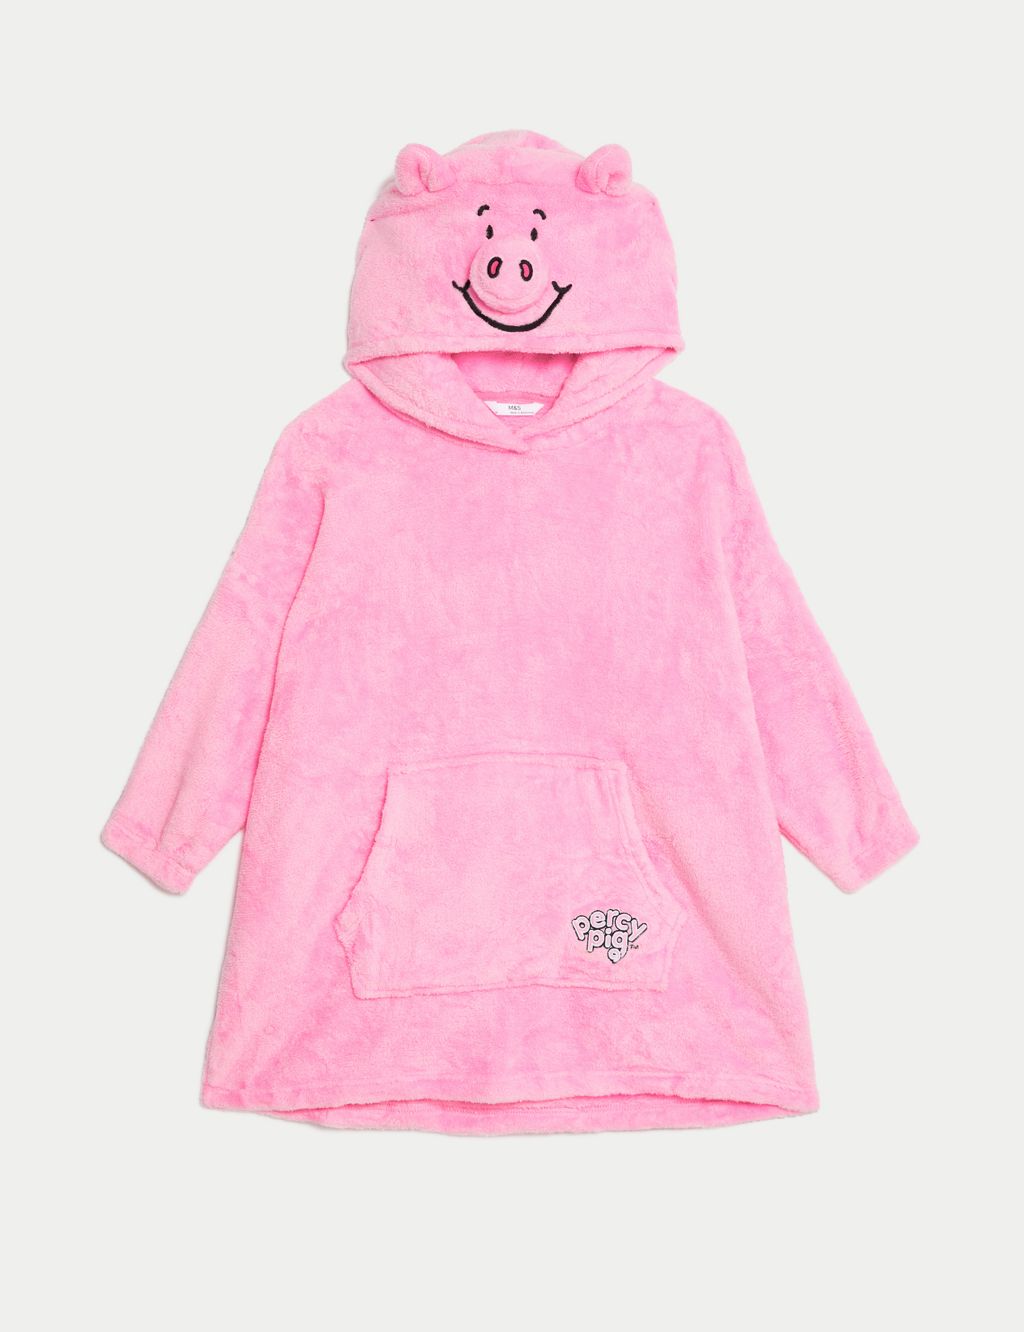 Novelty Percy Pig™ Foldable Hoodie (3-16 Yrs) image 2